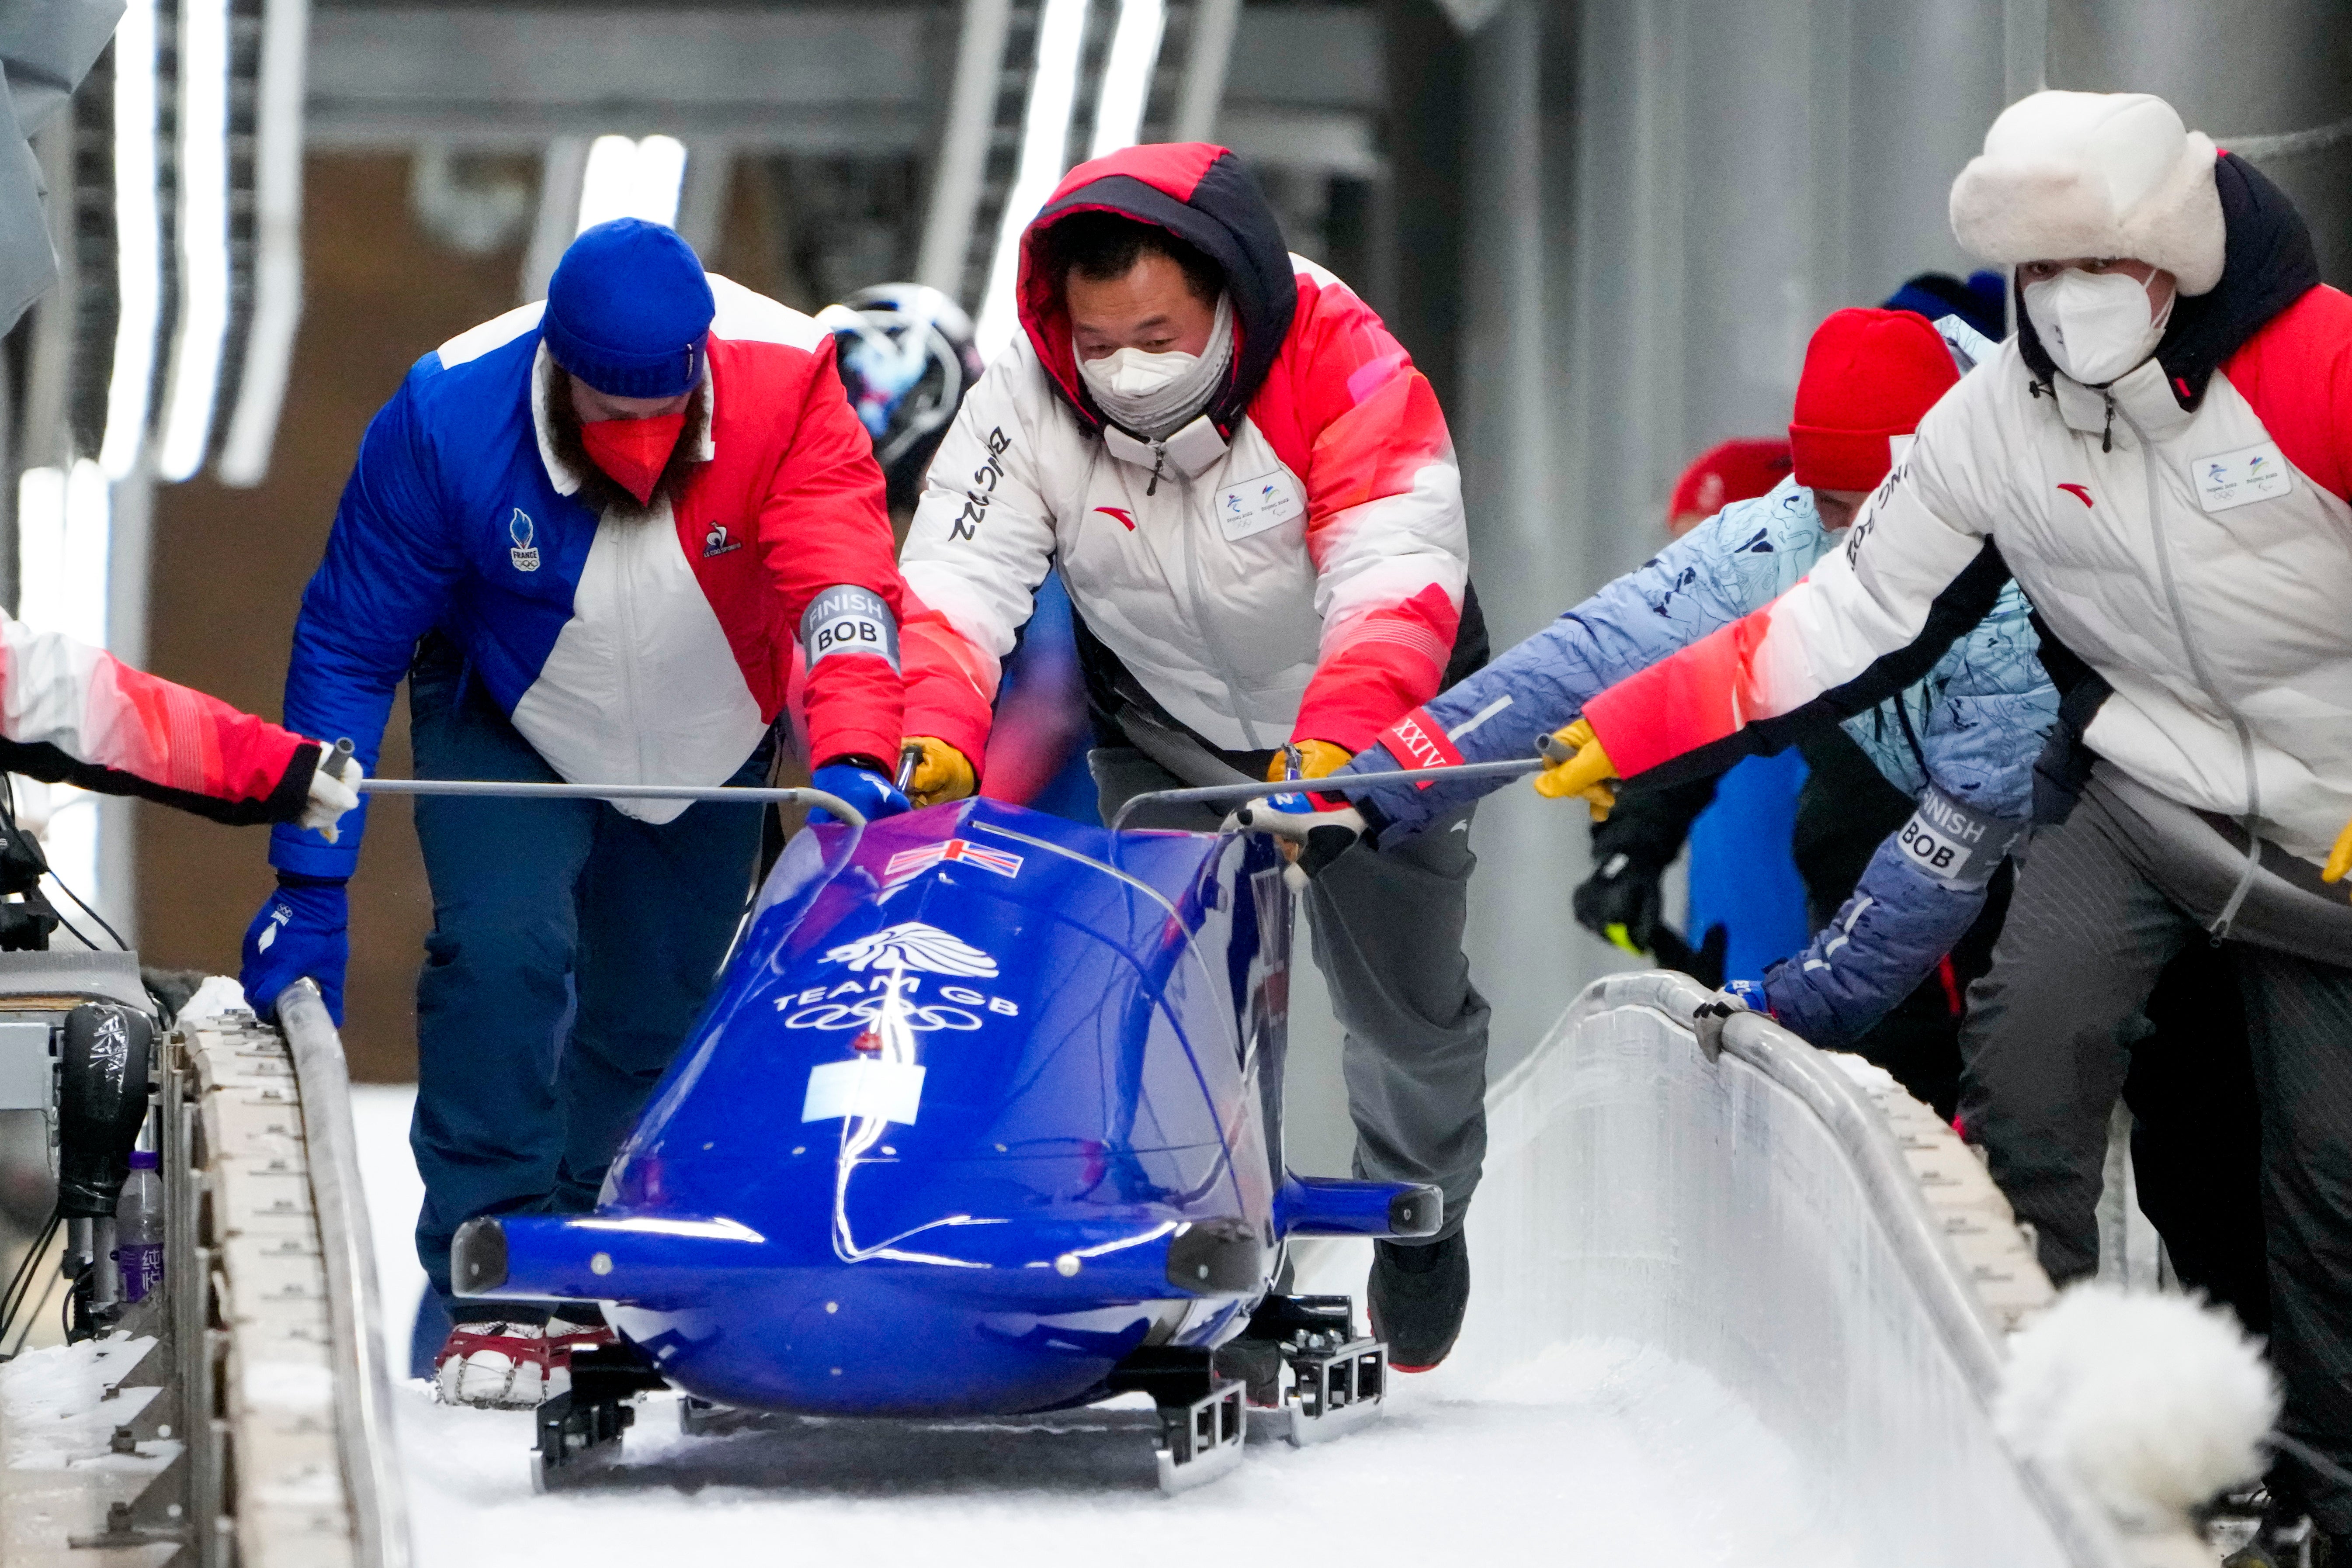 Track assistants push the bobsled of Brad Hall and Nick Gleeson